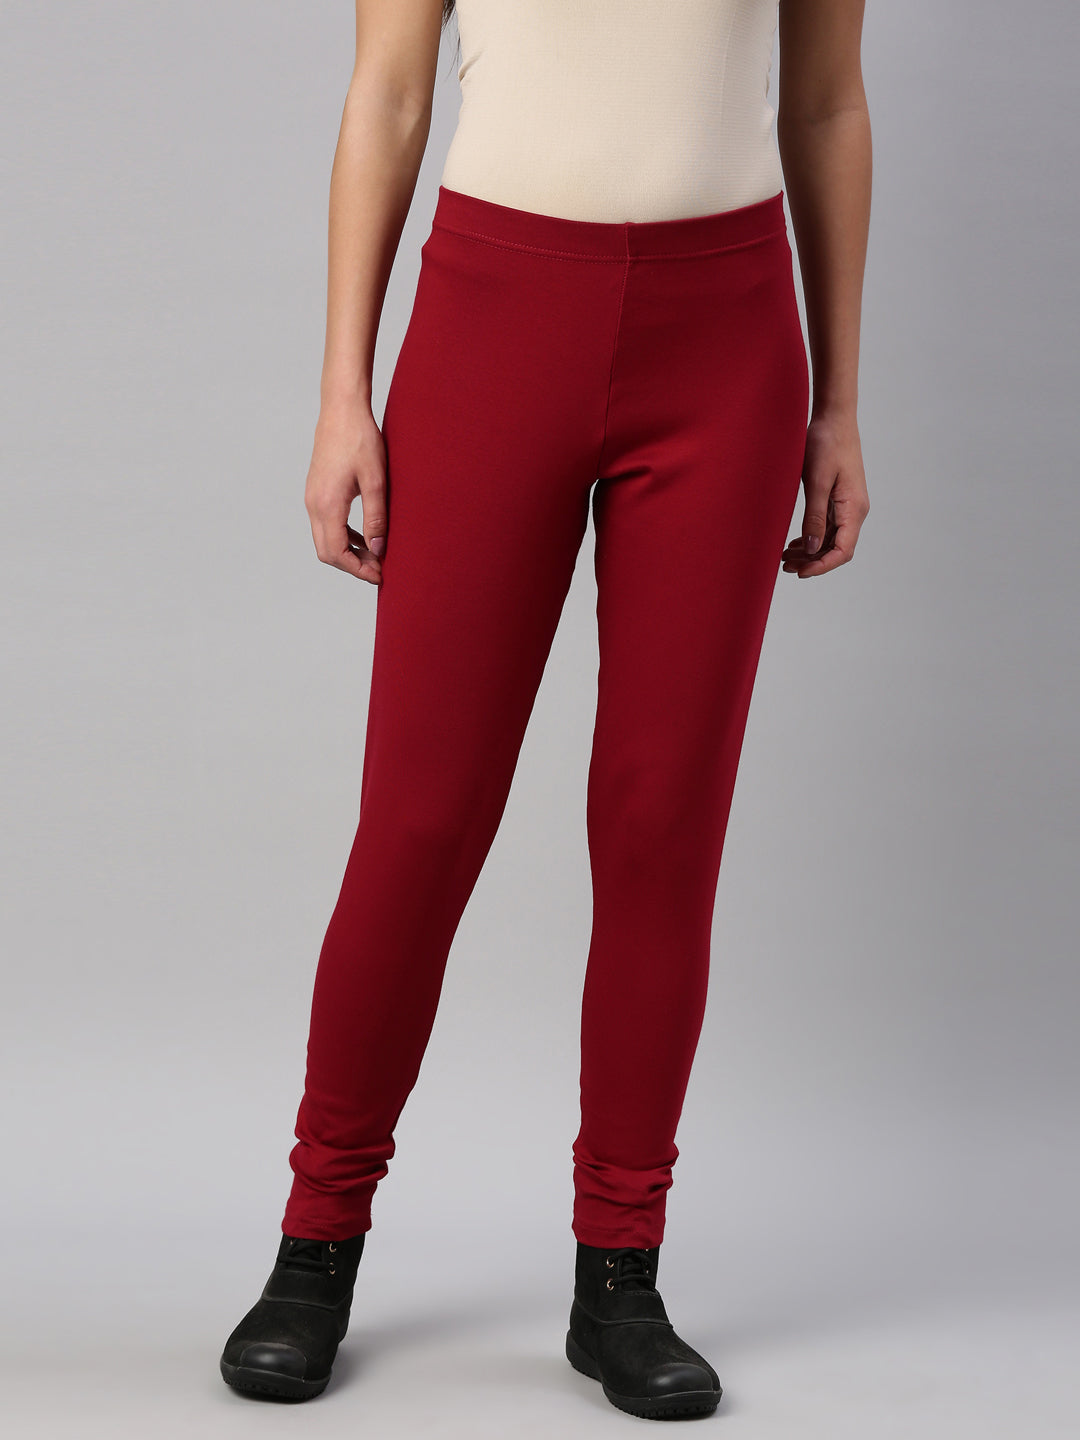 Women Solid Bright Red Ribbed Warm Leggings – Cherrypick